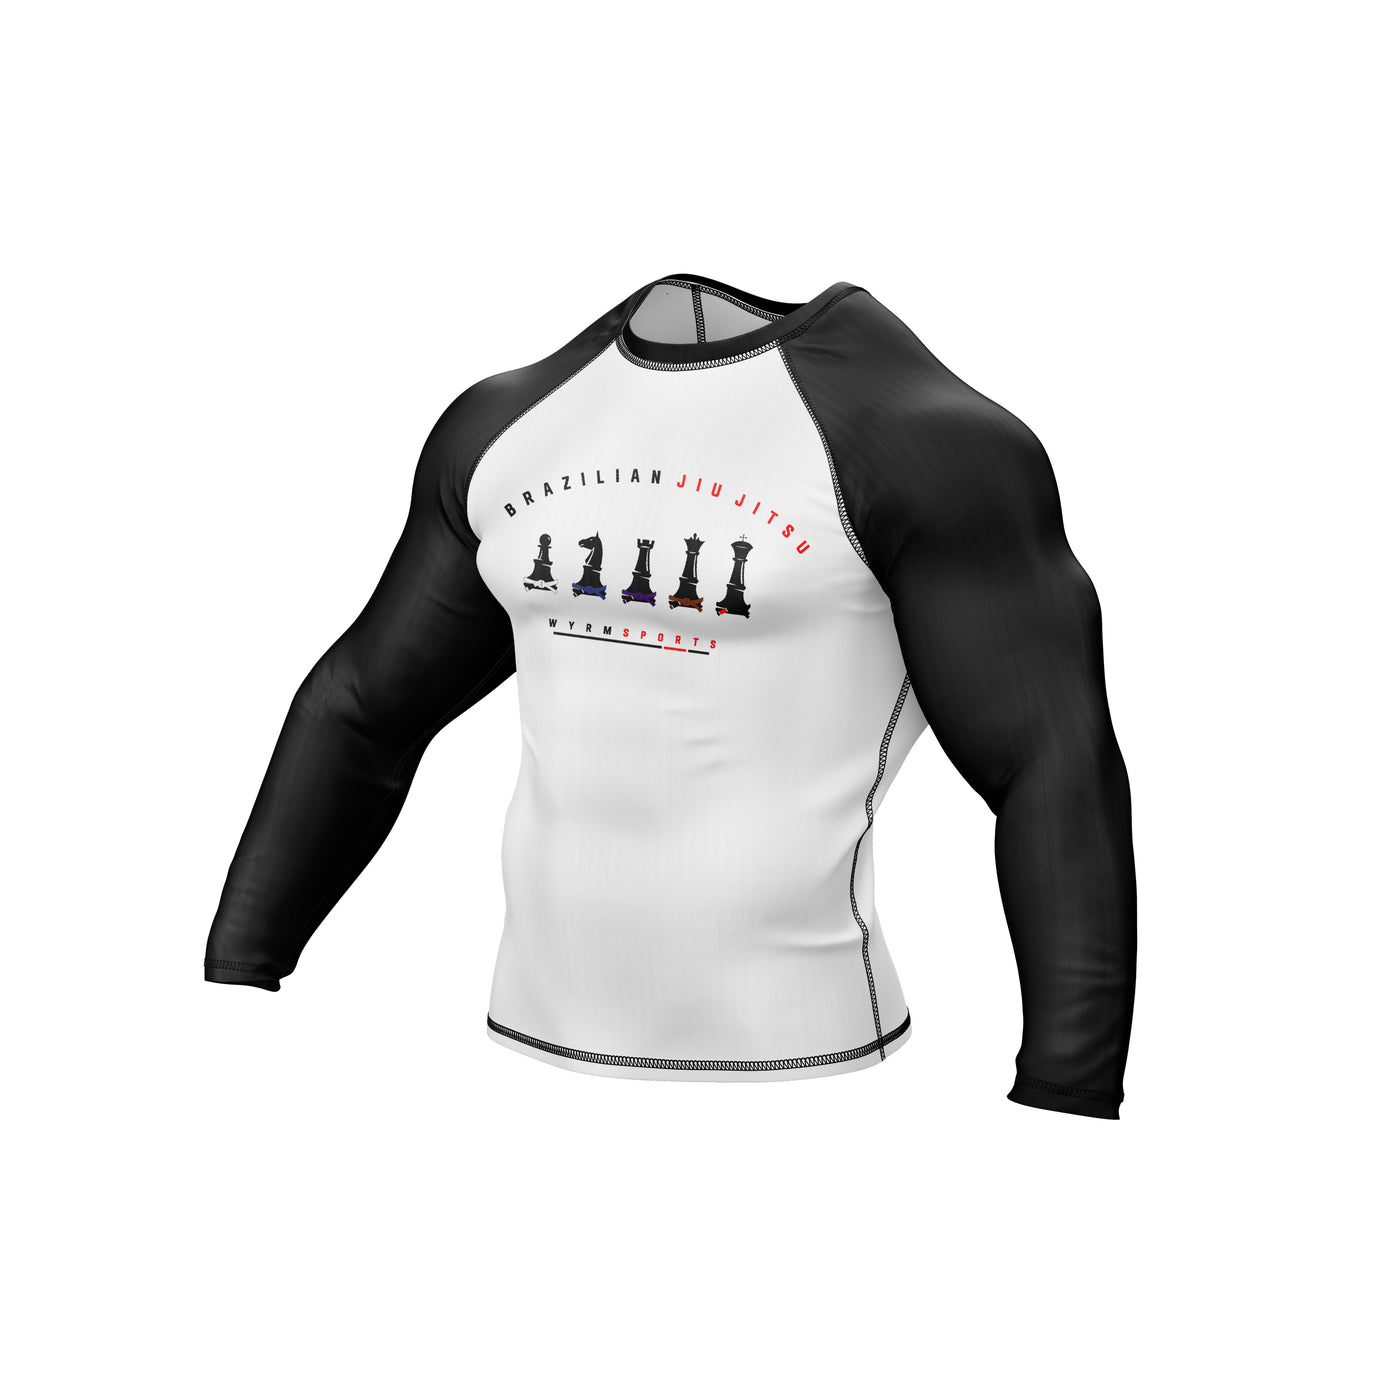 WYRM Chess Compression Top